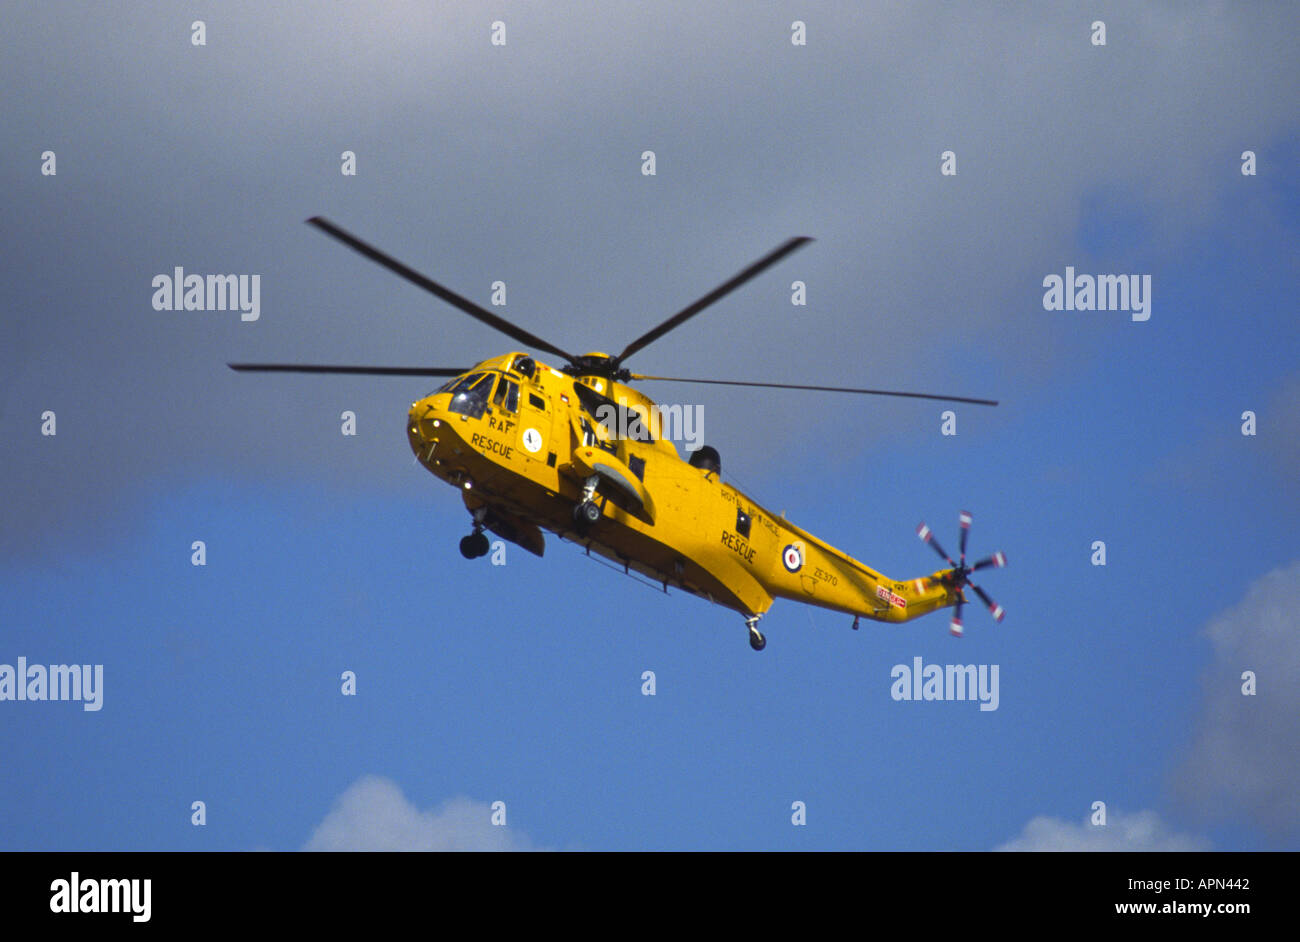 Royal Air Force británica Mar Mar King Air Rescue Helicopter Foto de stock